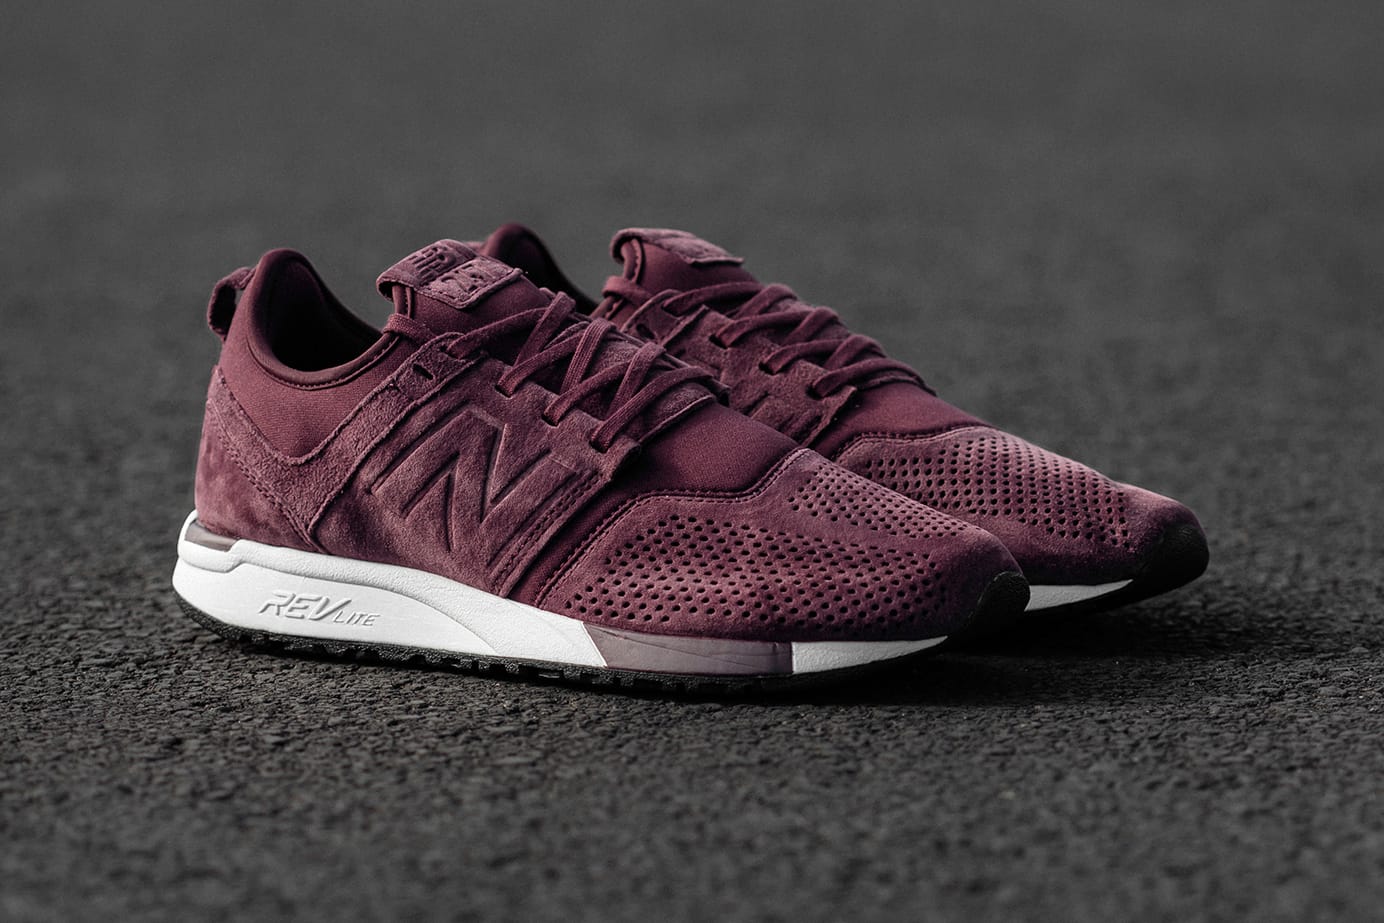 New Balance Releases the 247 in Burgundy/White | HYPEBEAST